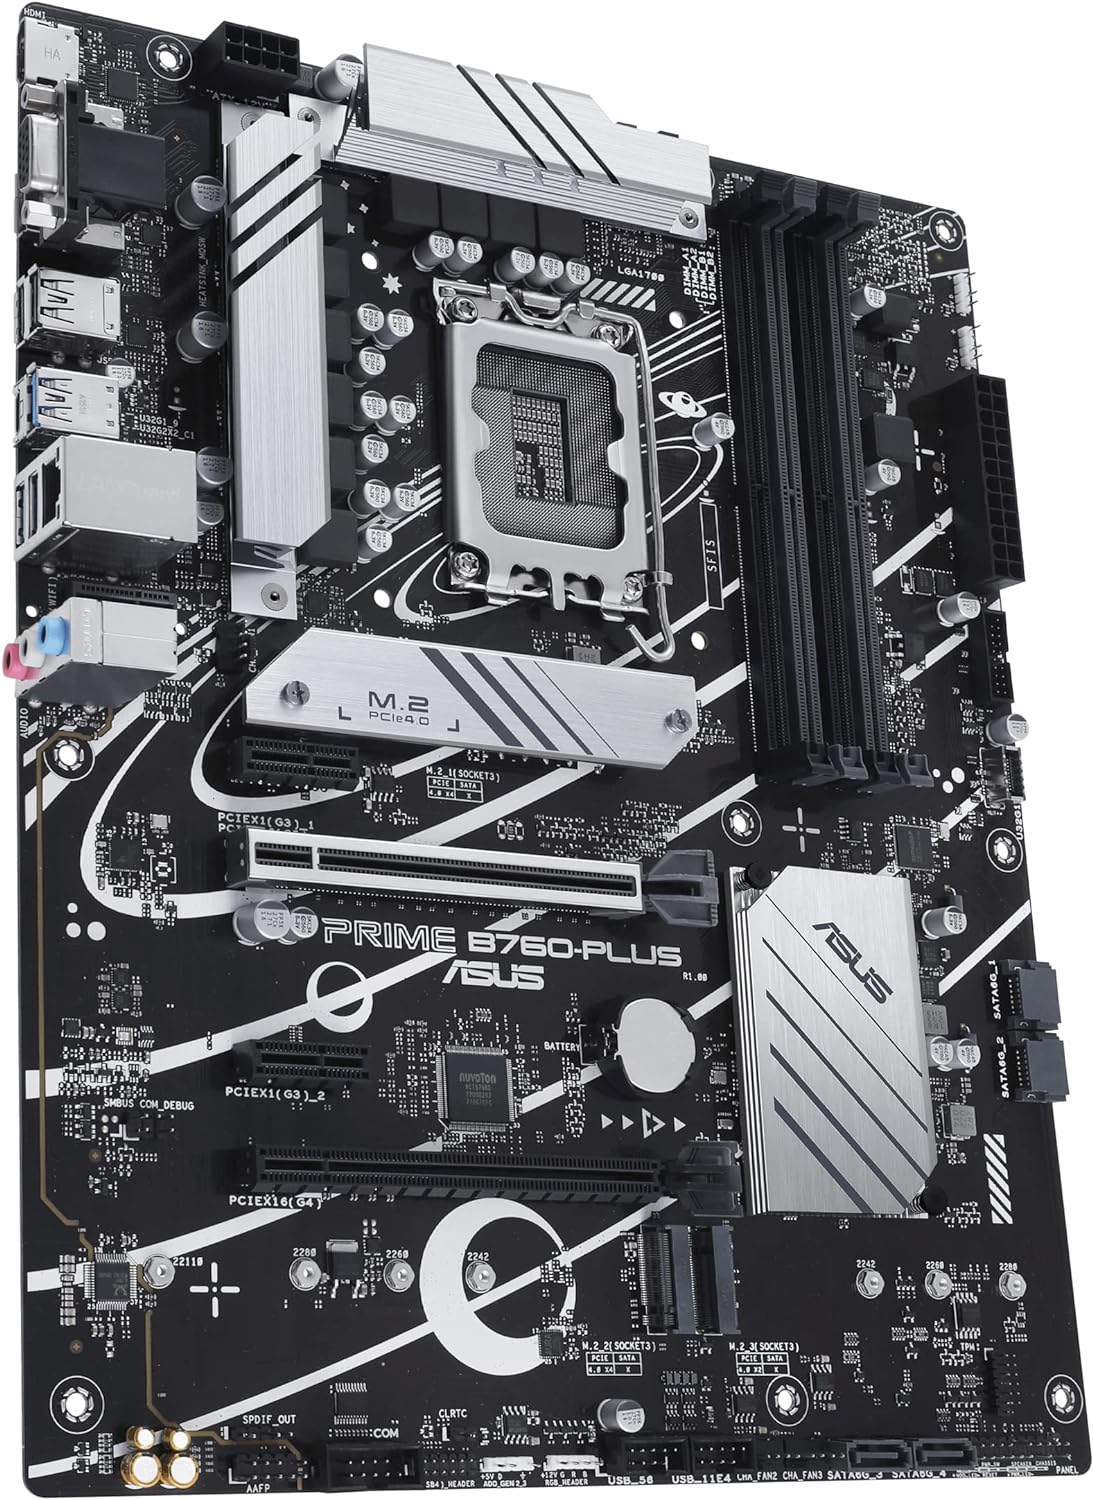 Feature-Rich ASUS Prime B760-PLUS ATX Motherboard with PCIe 5.0 0197105102989